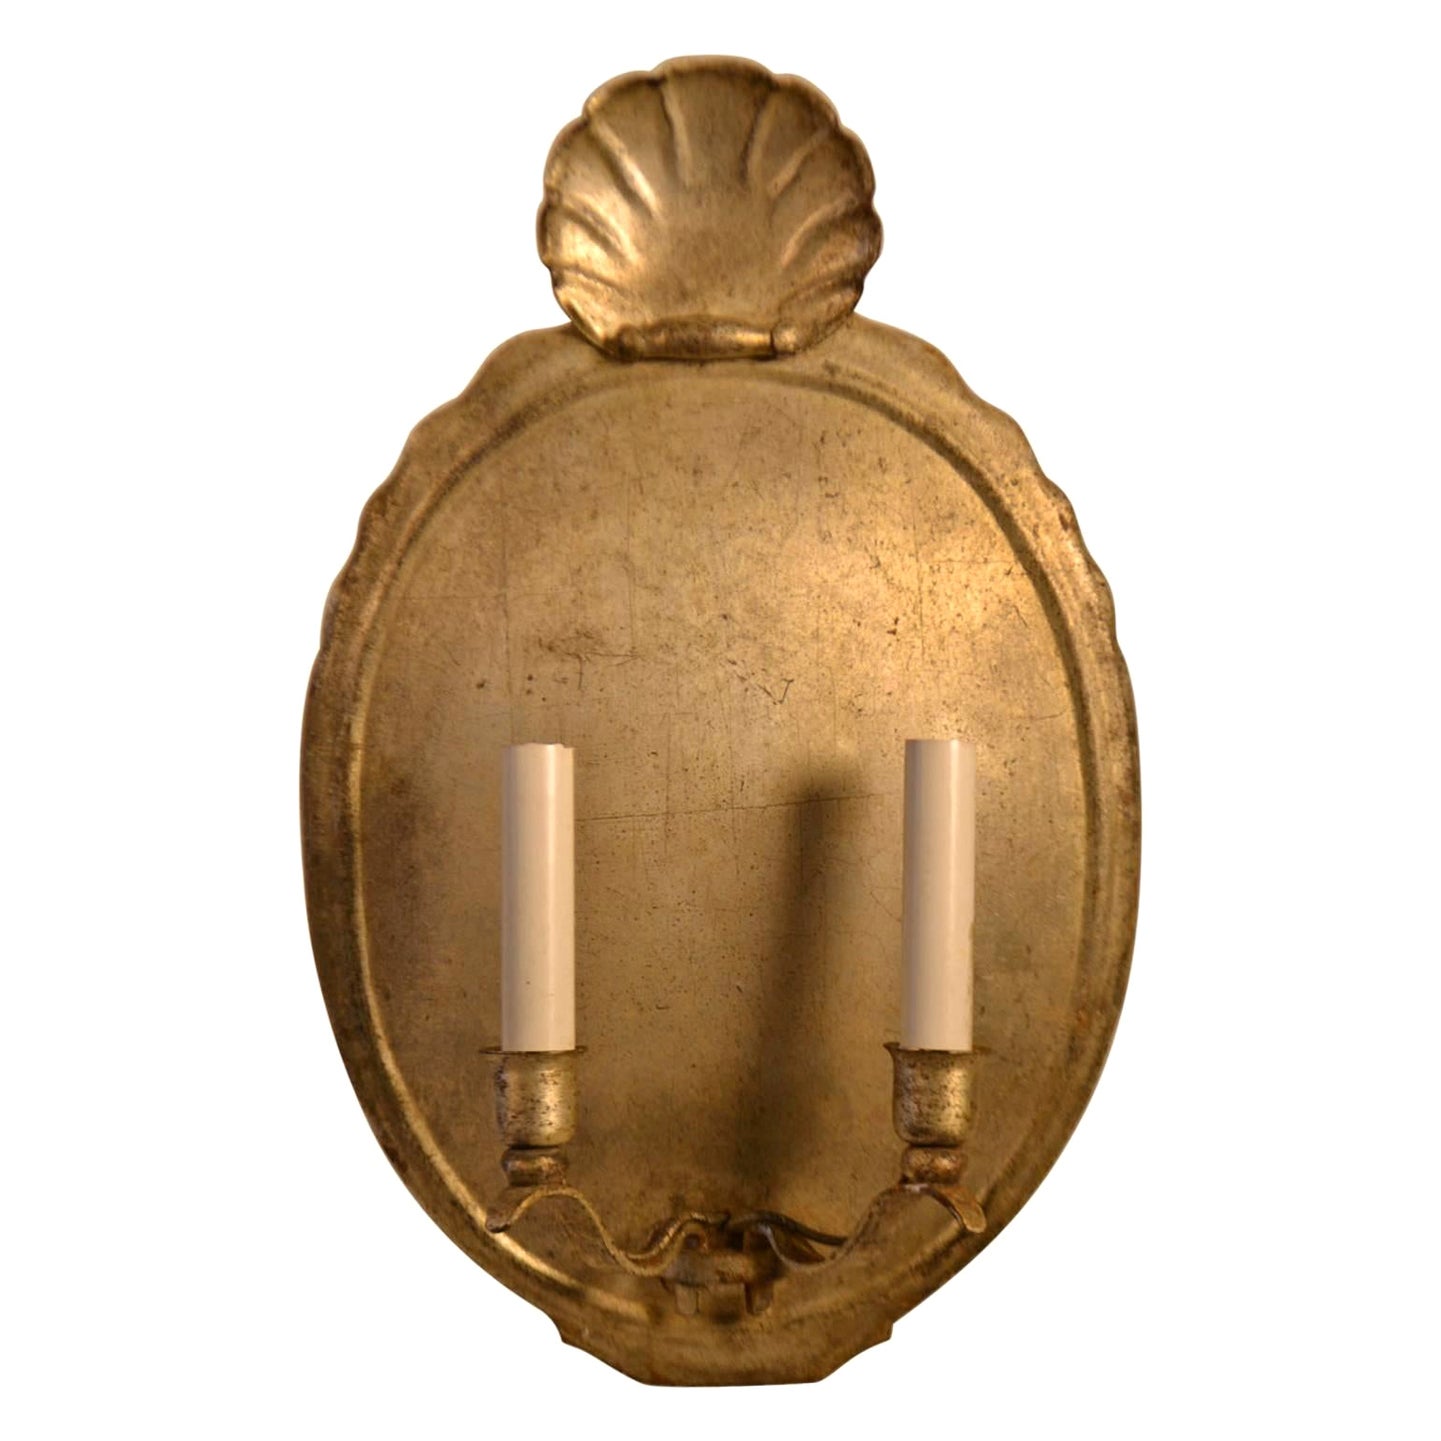 Turn of the Century Metal Wall Sconce